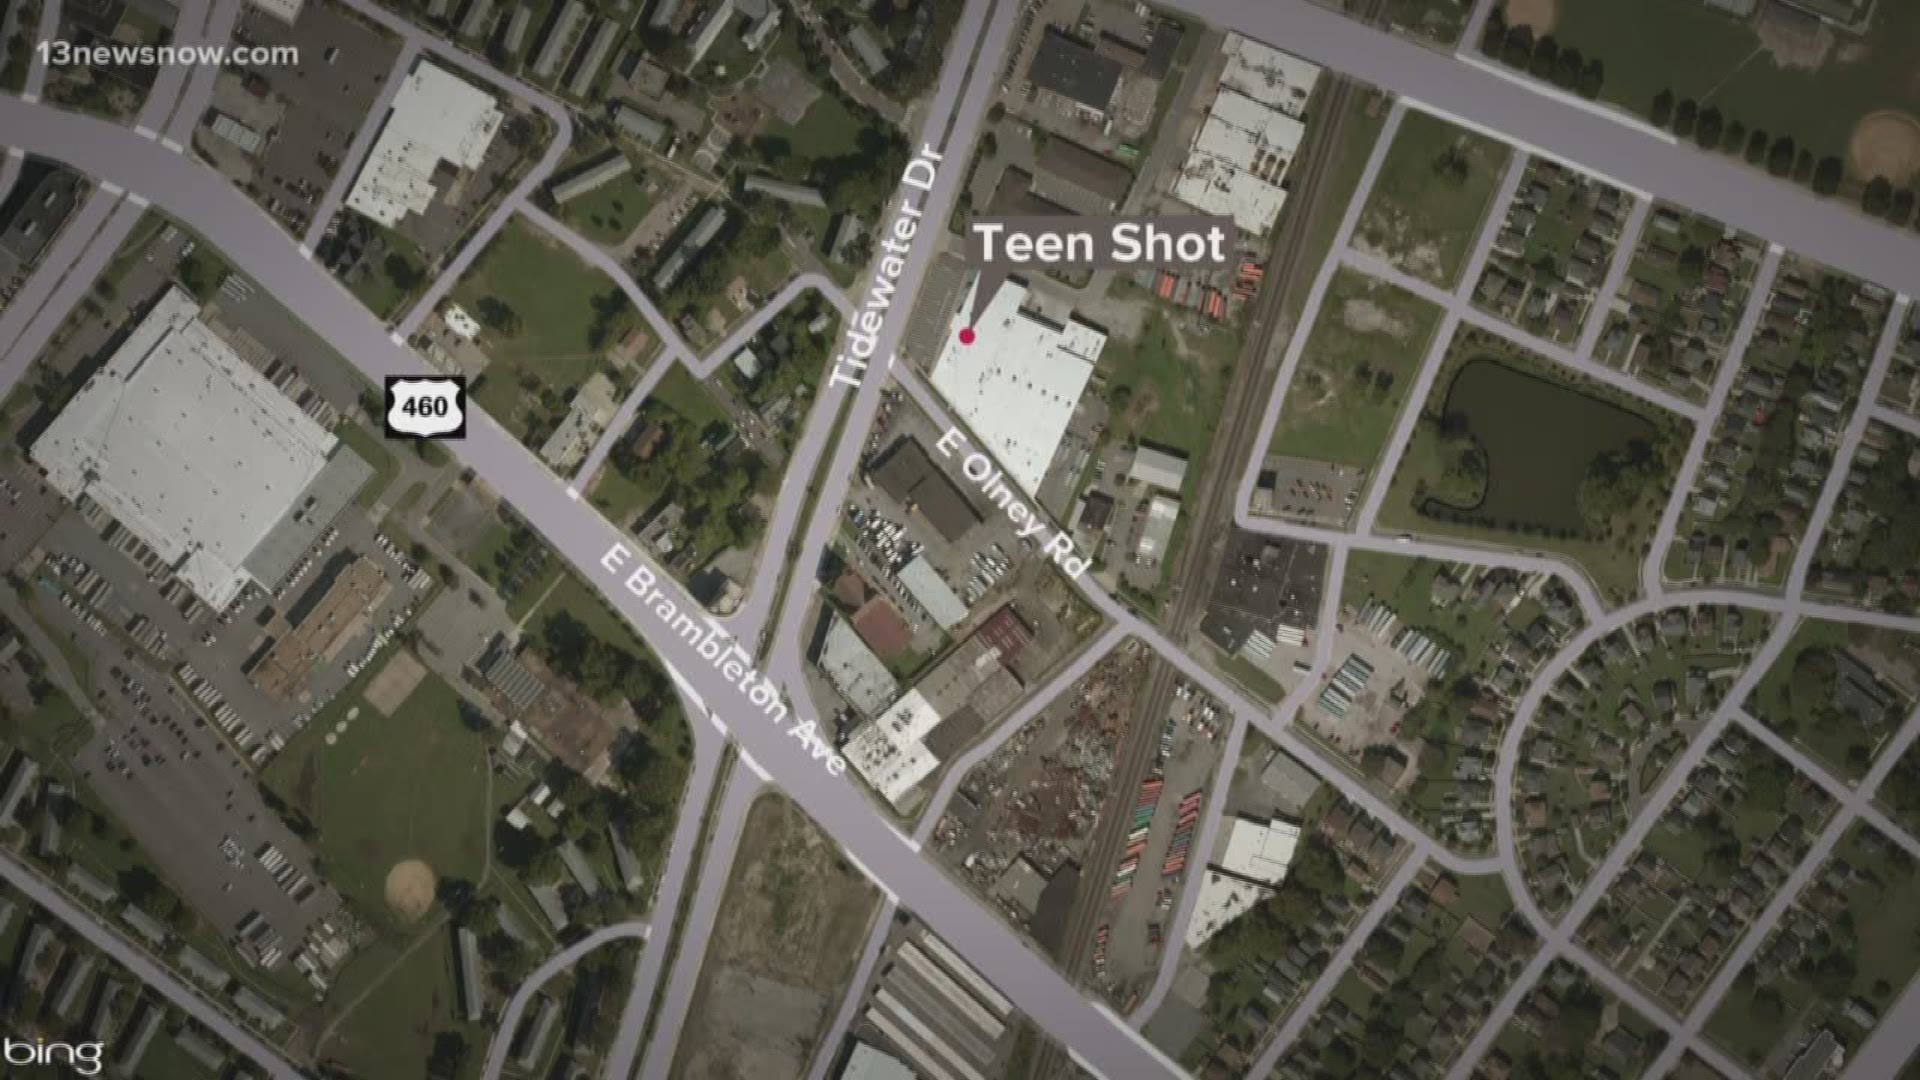 According to Norfolk dispatch, a 16-year-old boy was shot in the kneecap and took himself to the hospital.